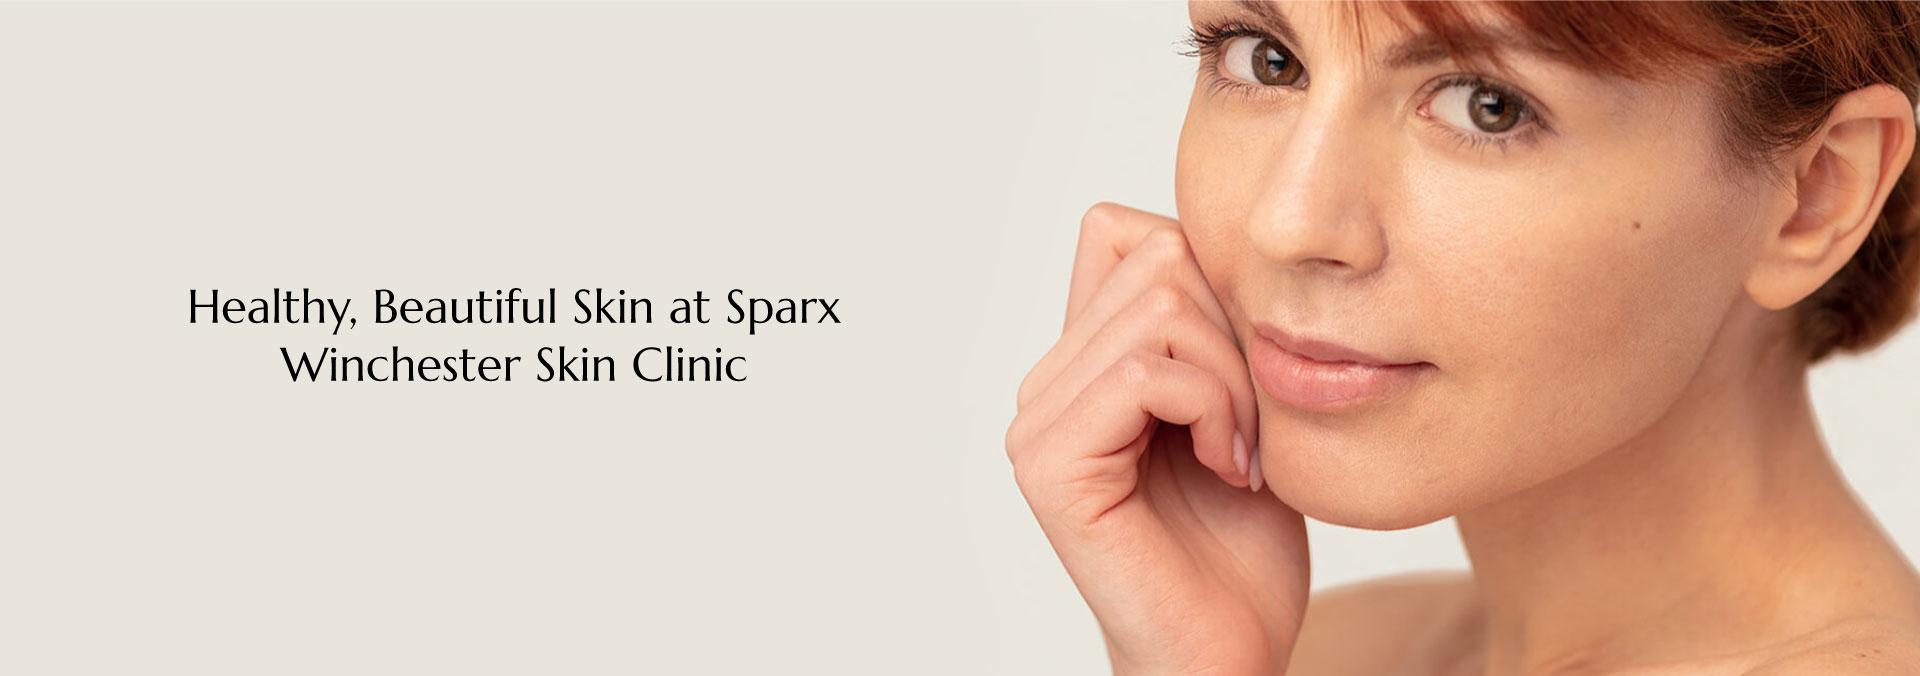 Healthy Beautiful Skin at Sparx Winchester Skin Clinic